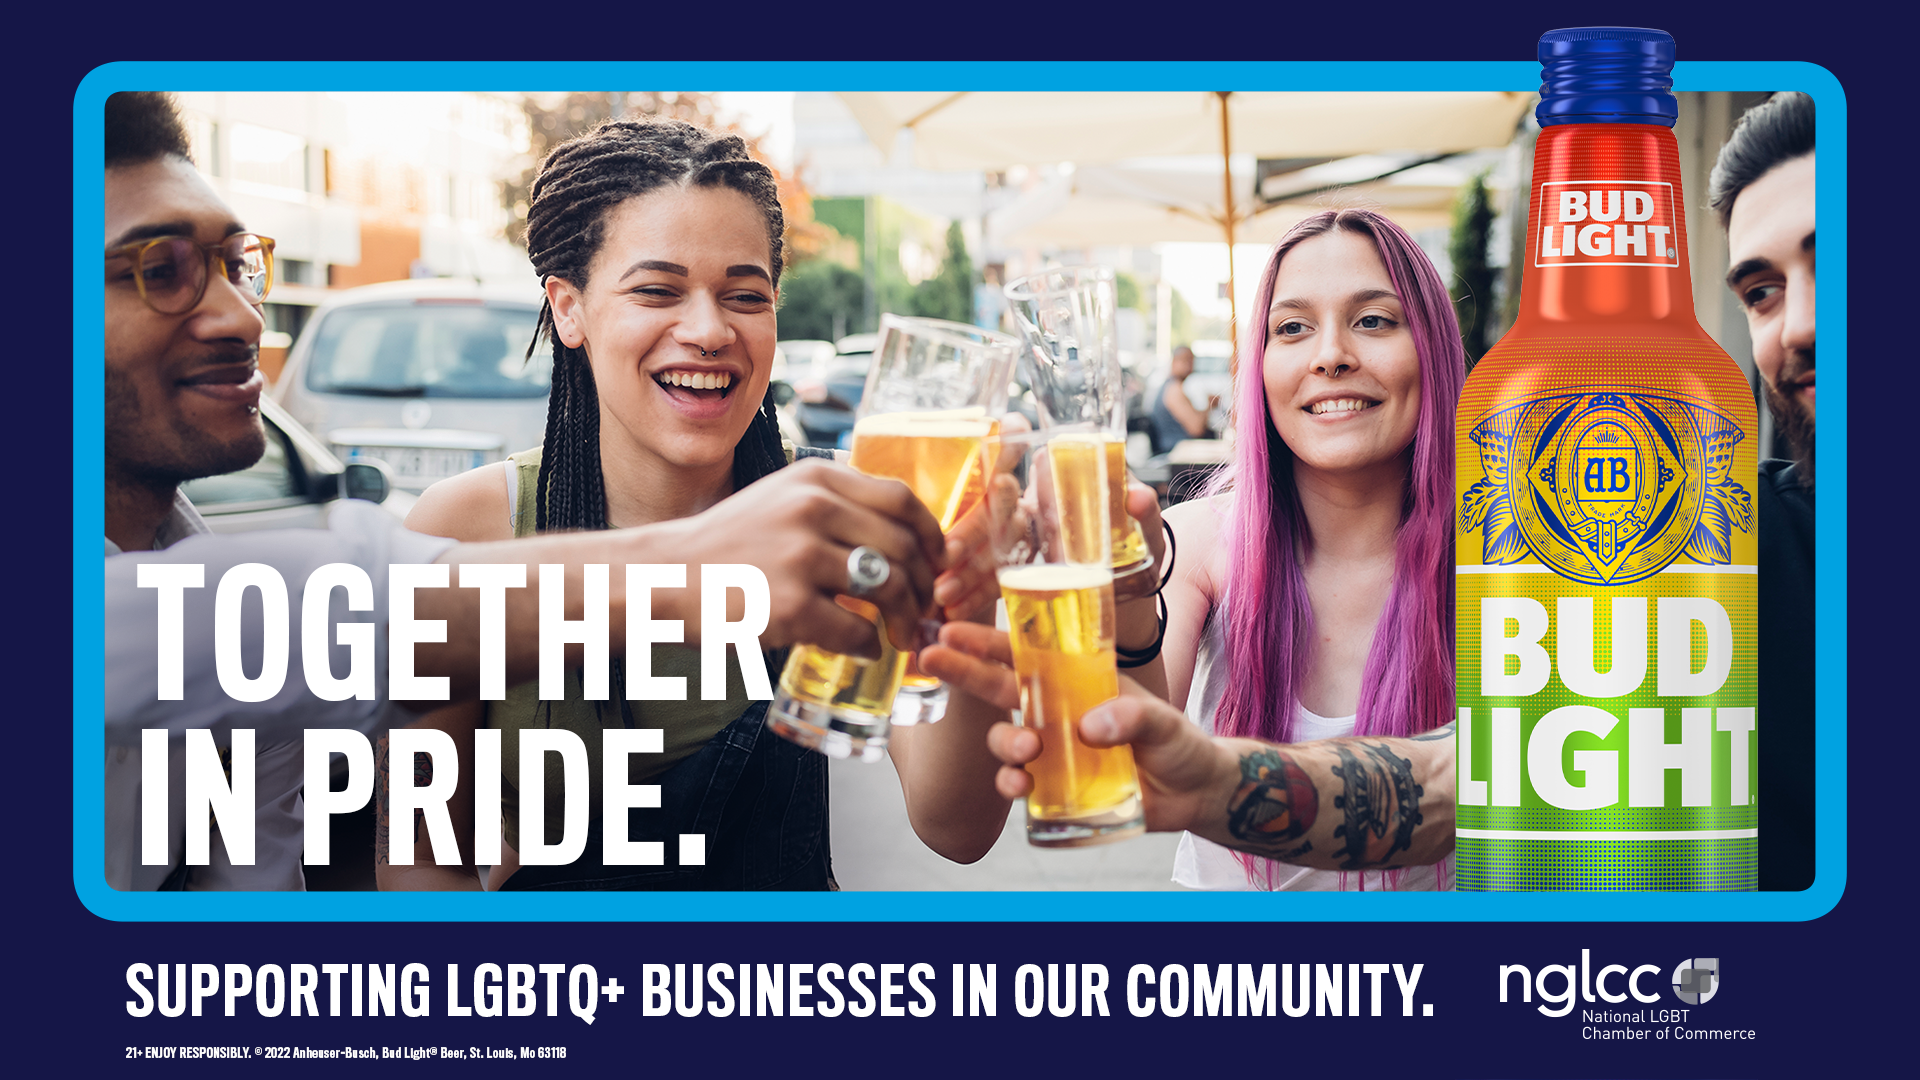 Bud Light Joins Forces with the NGLCC to Support Local LGBTQ+ Businesses Across the Country